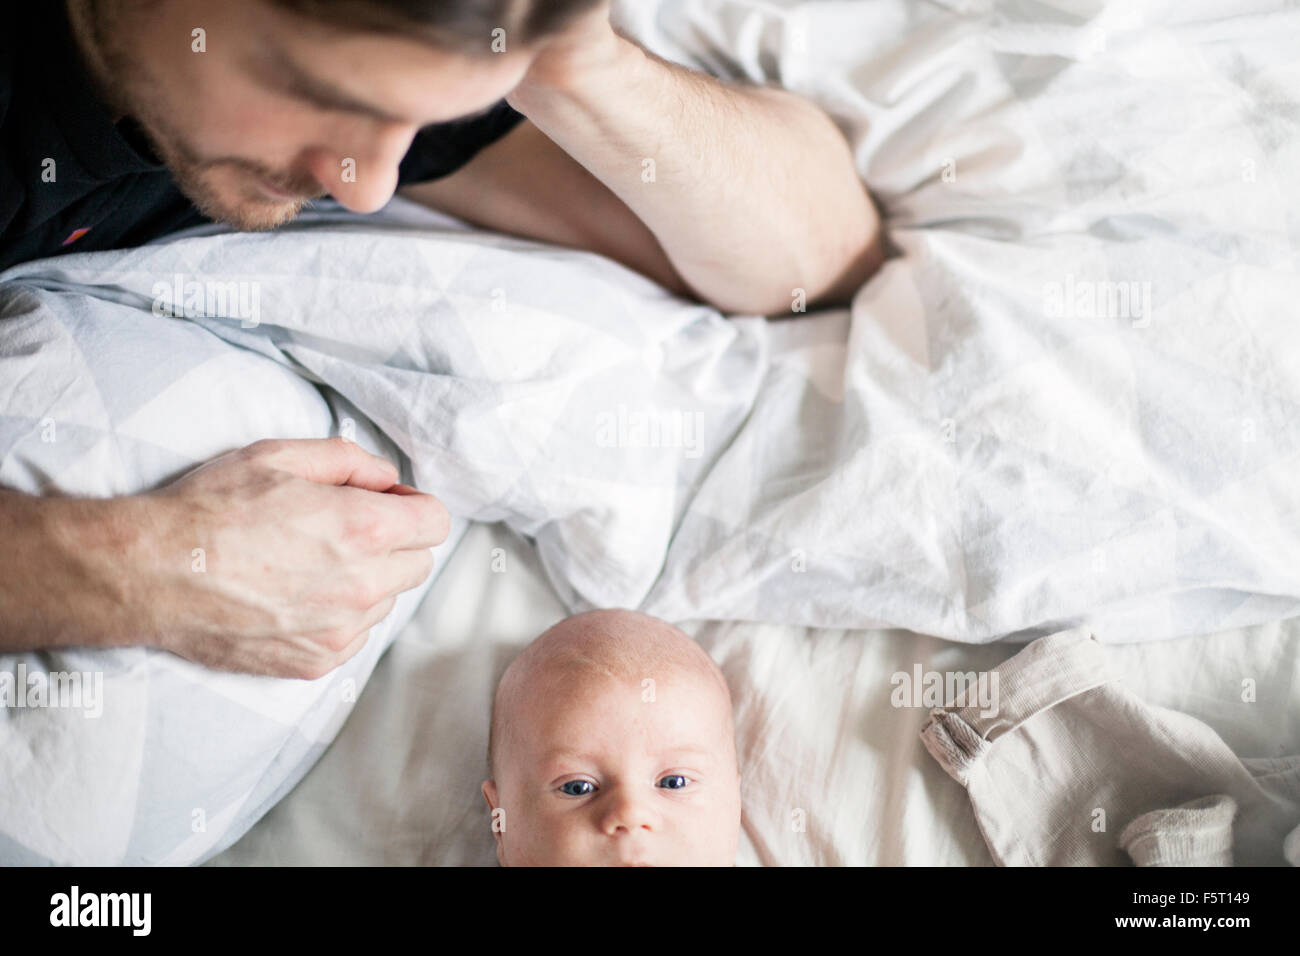 Sweden, Man looking at baby boy (0-1 months) Stock Photo